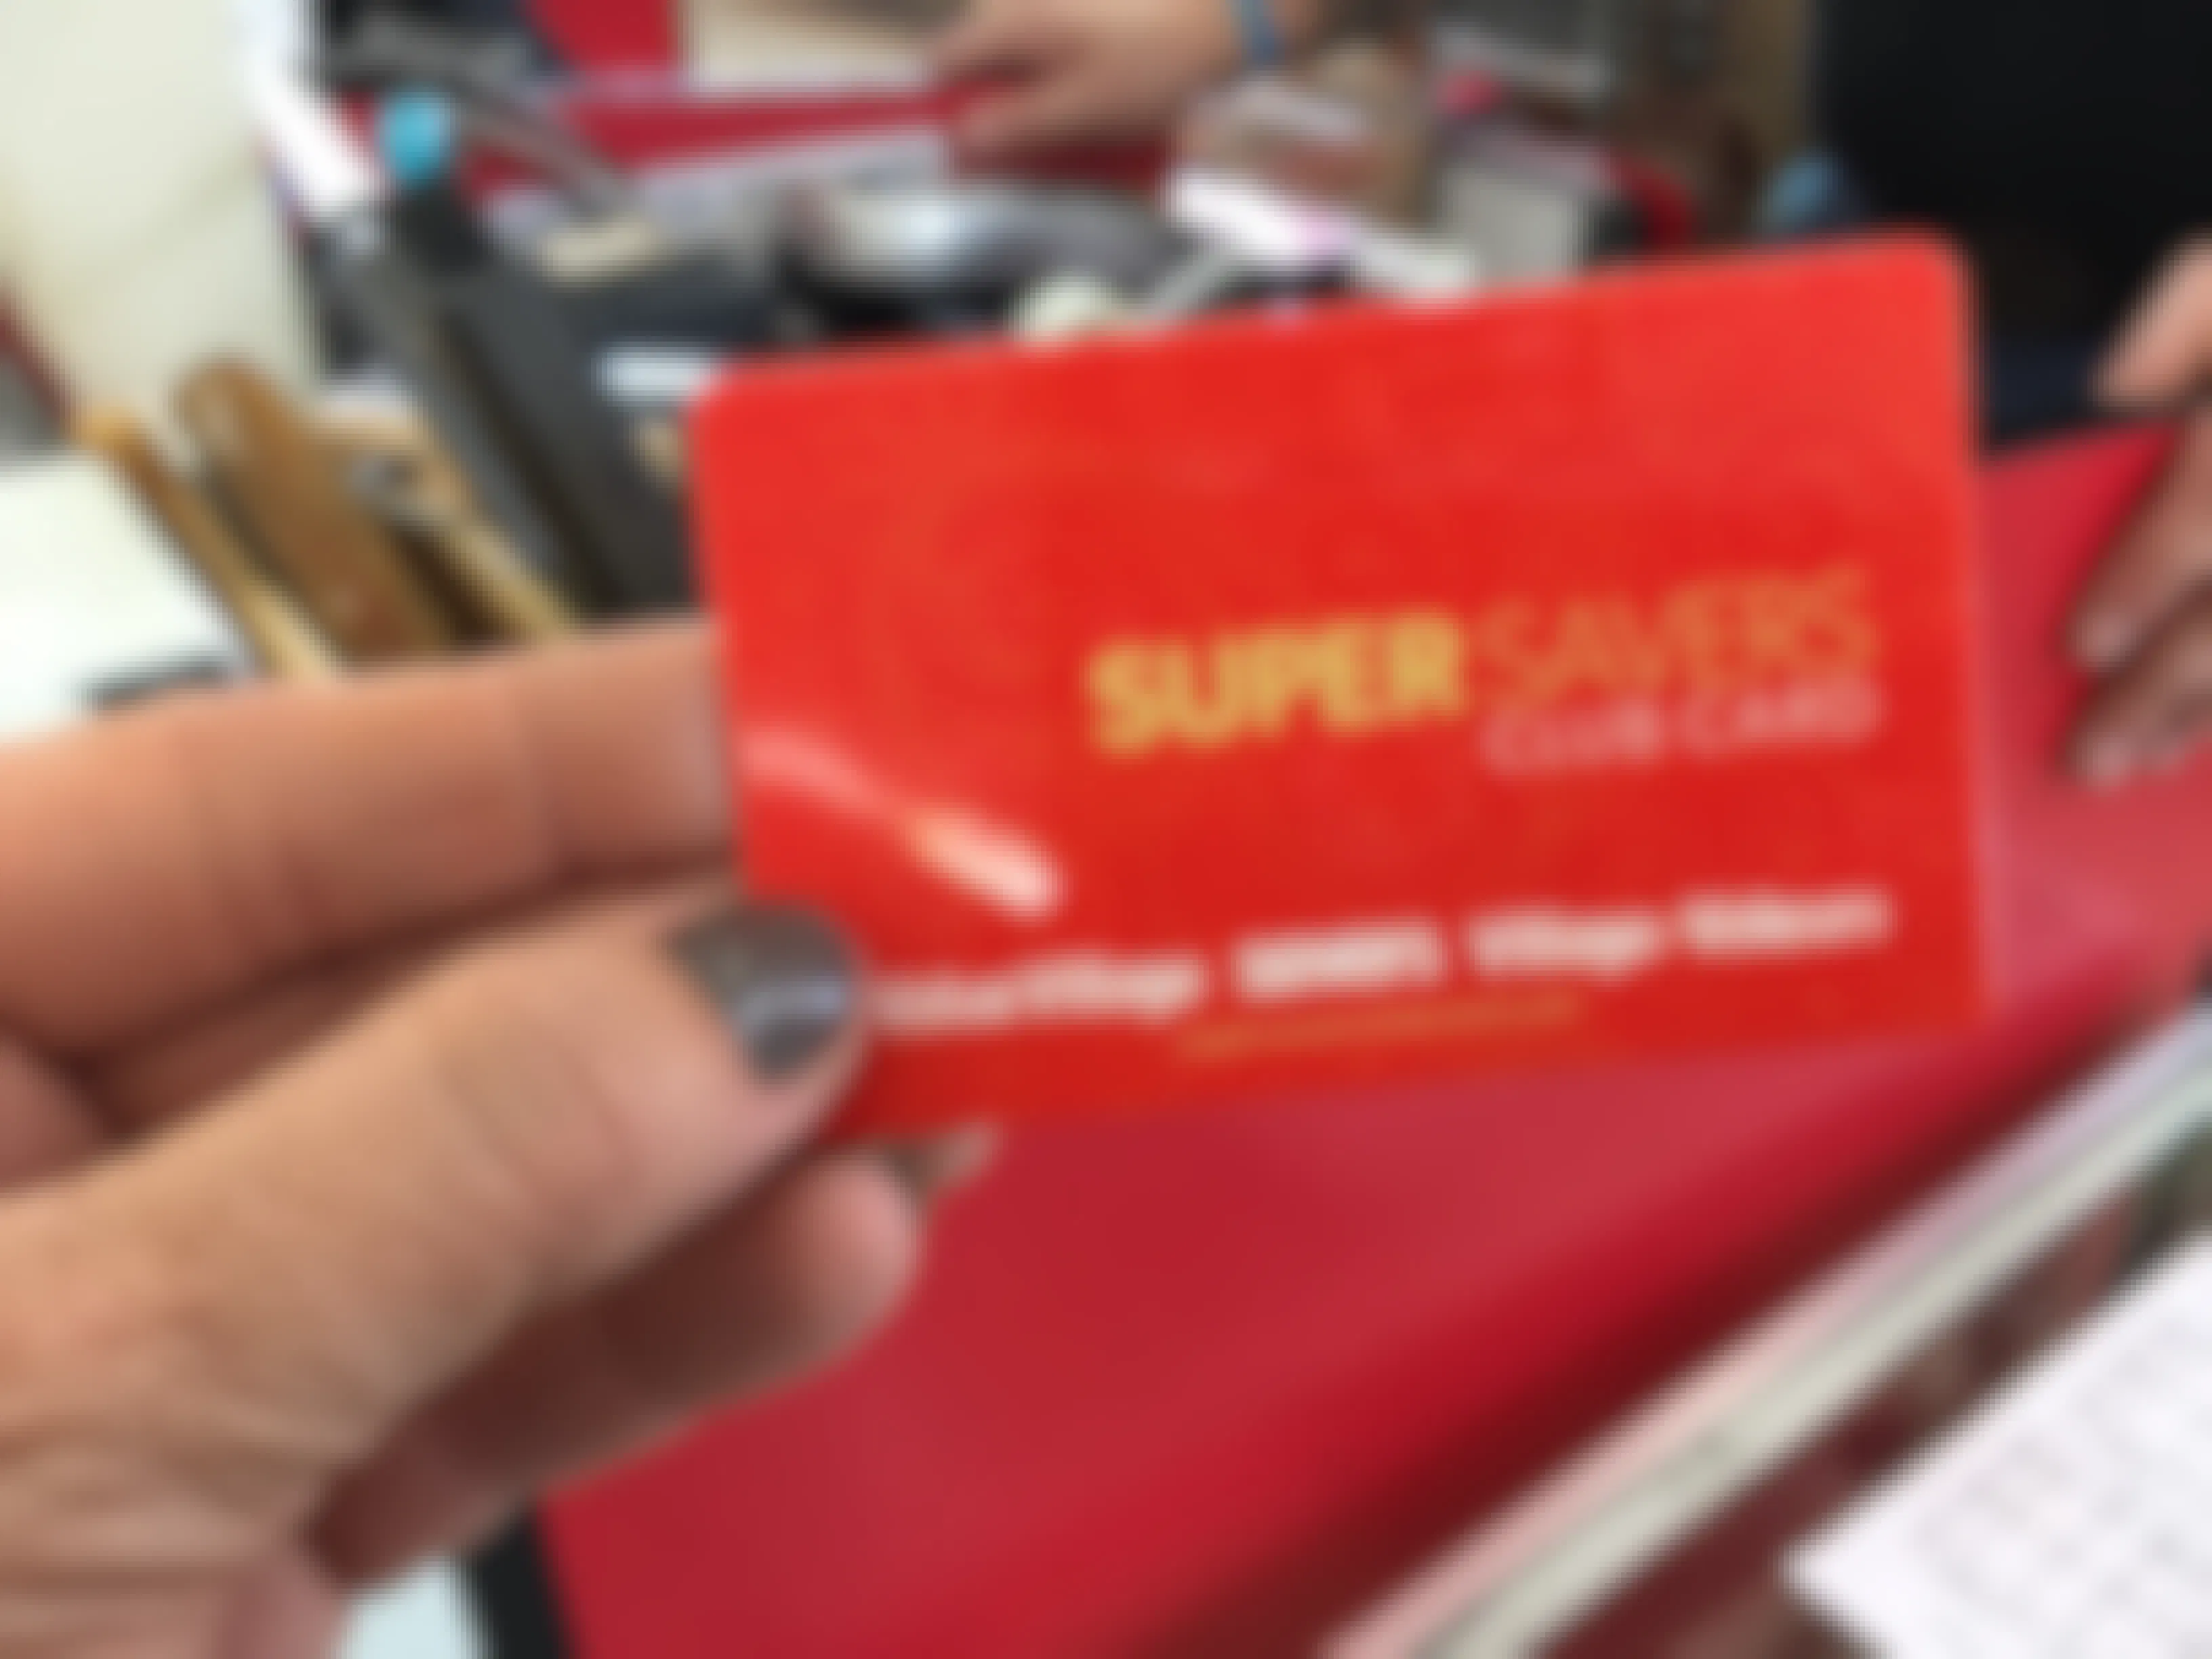 A person holding a Super Savers card in a Value Village thrift store